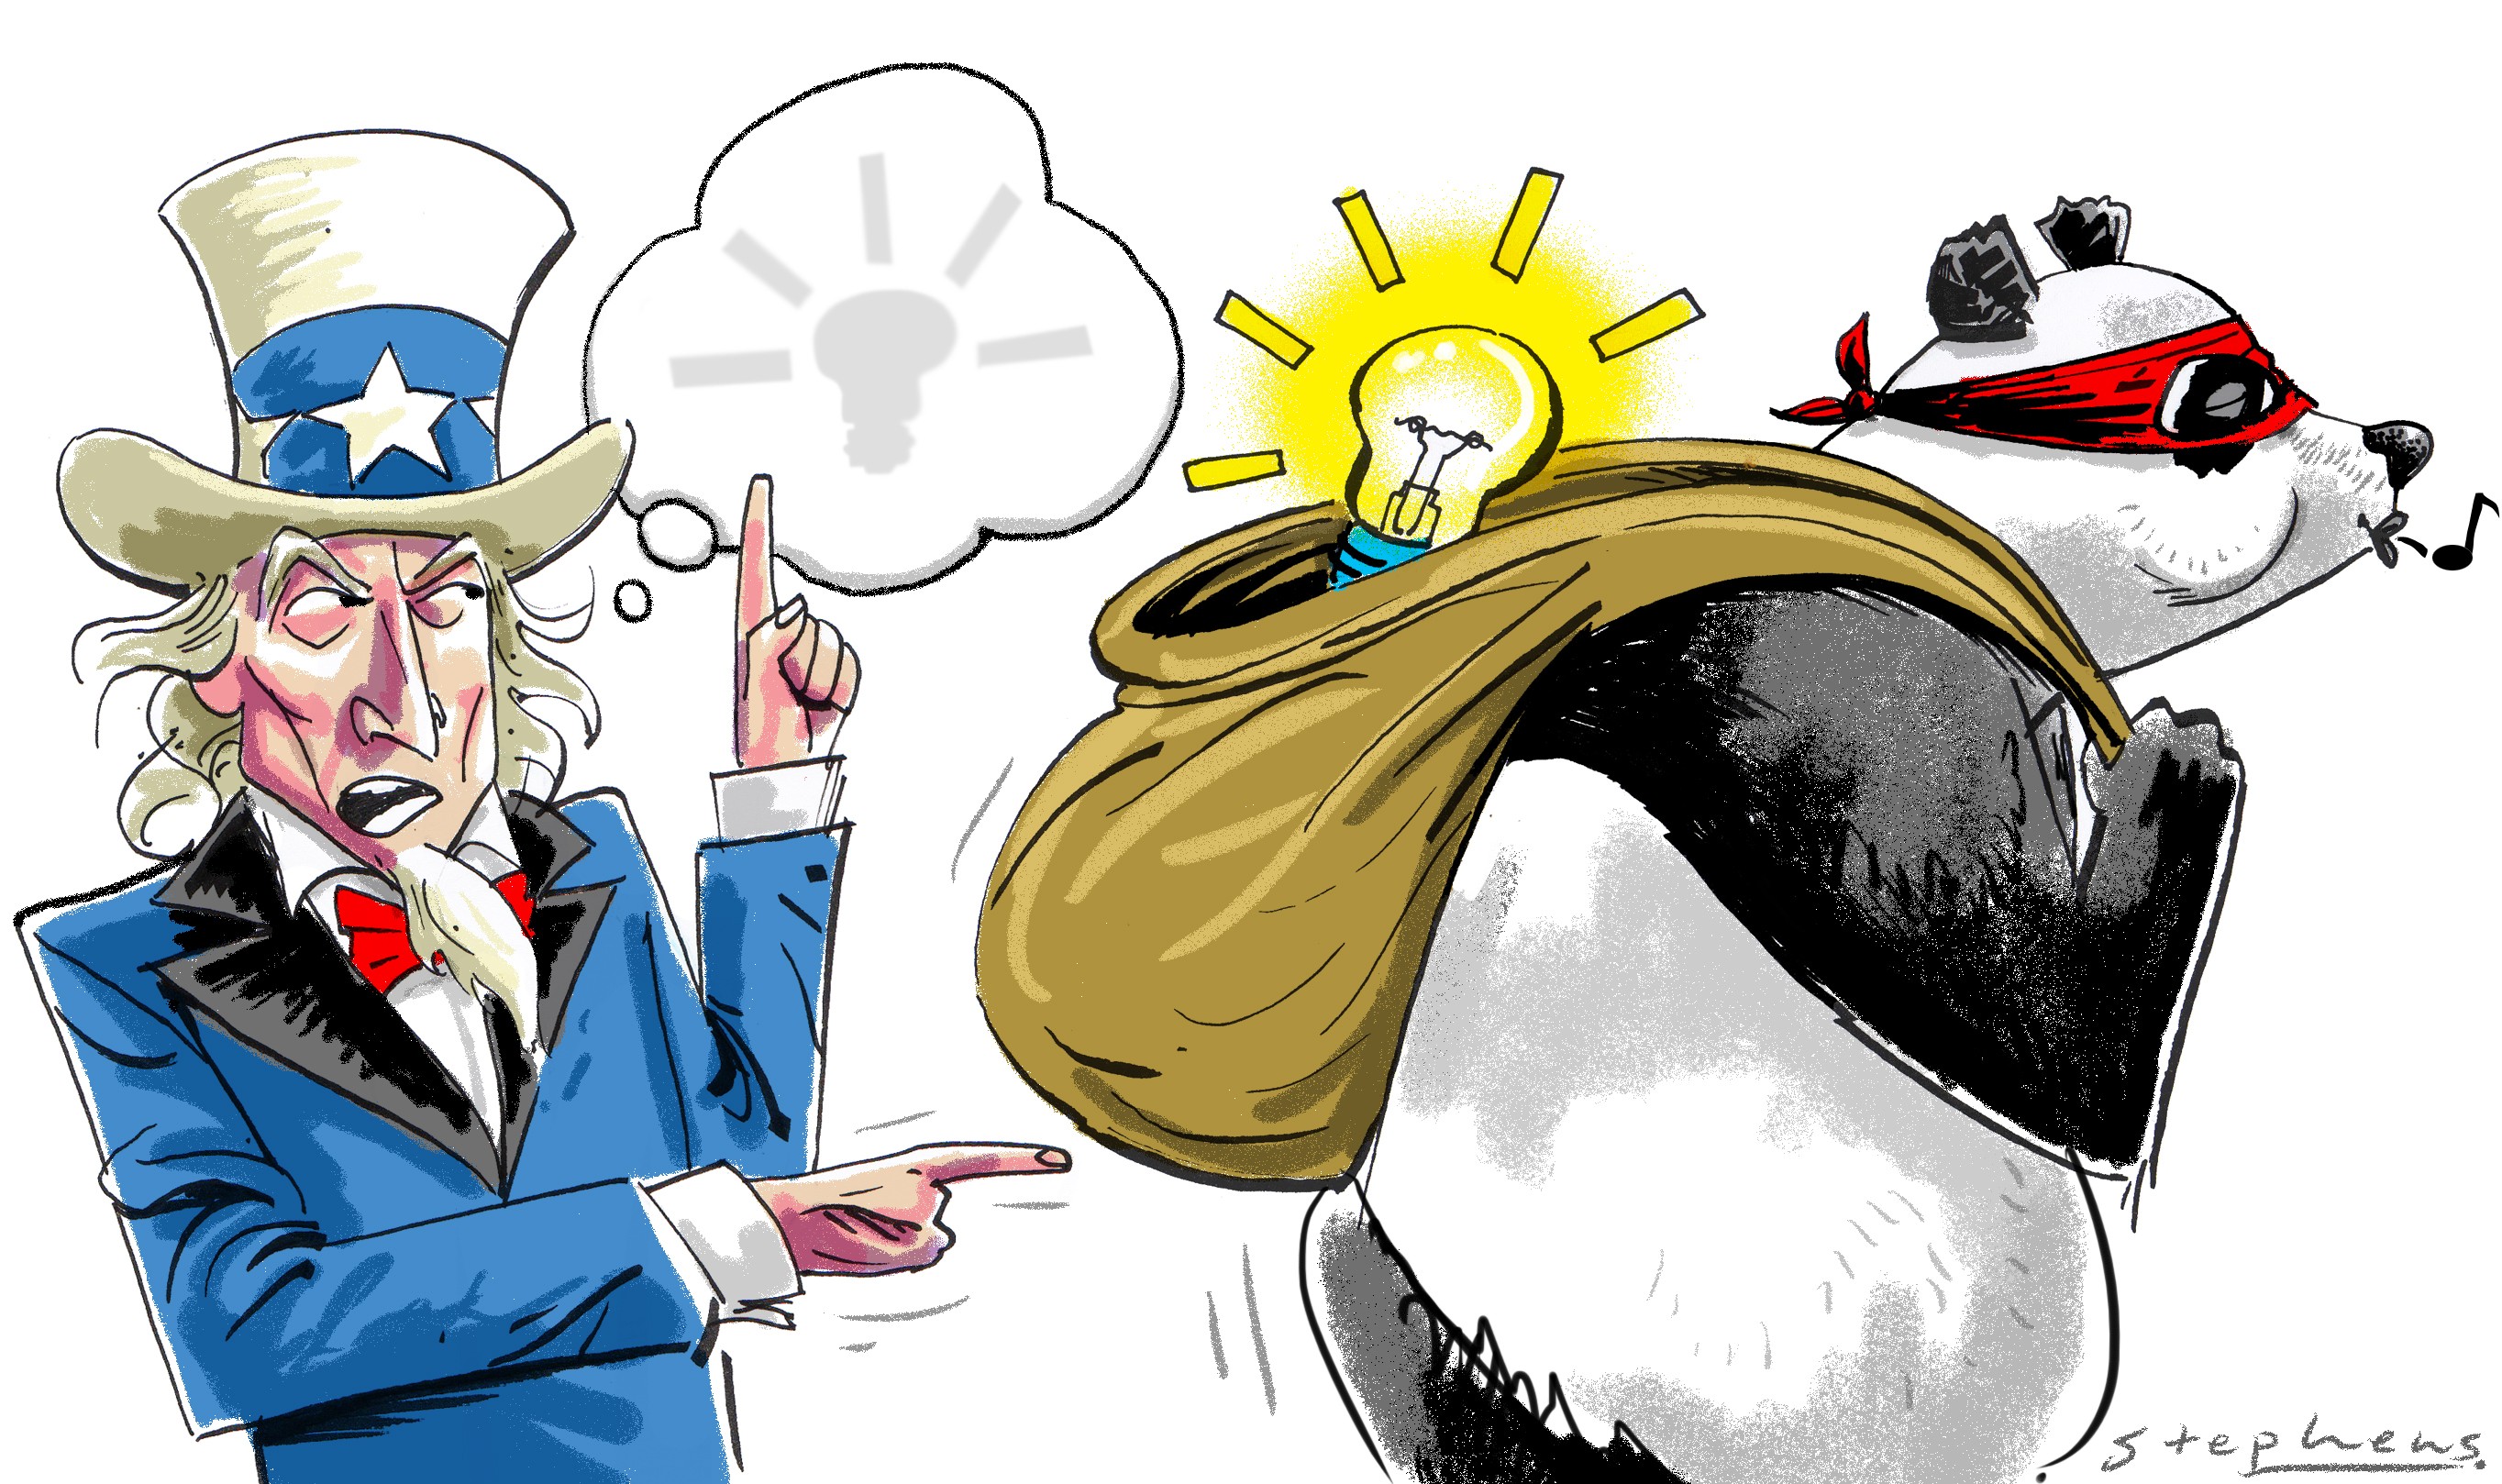 China is likely to be in transition to a competitor in intellectual property. The problem is that, unlike Japan, China is not only an economic competitor, but also an ideological competitor. Illustration: Craig Stephens